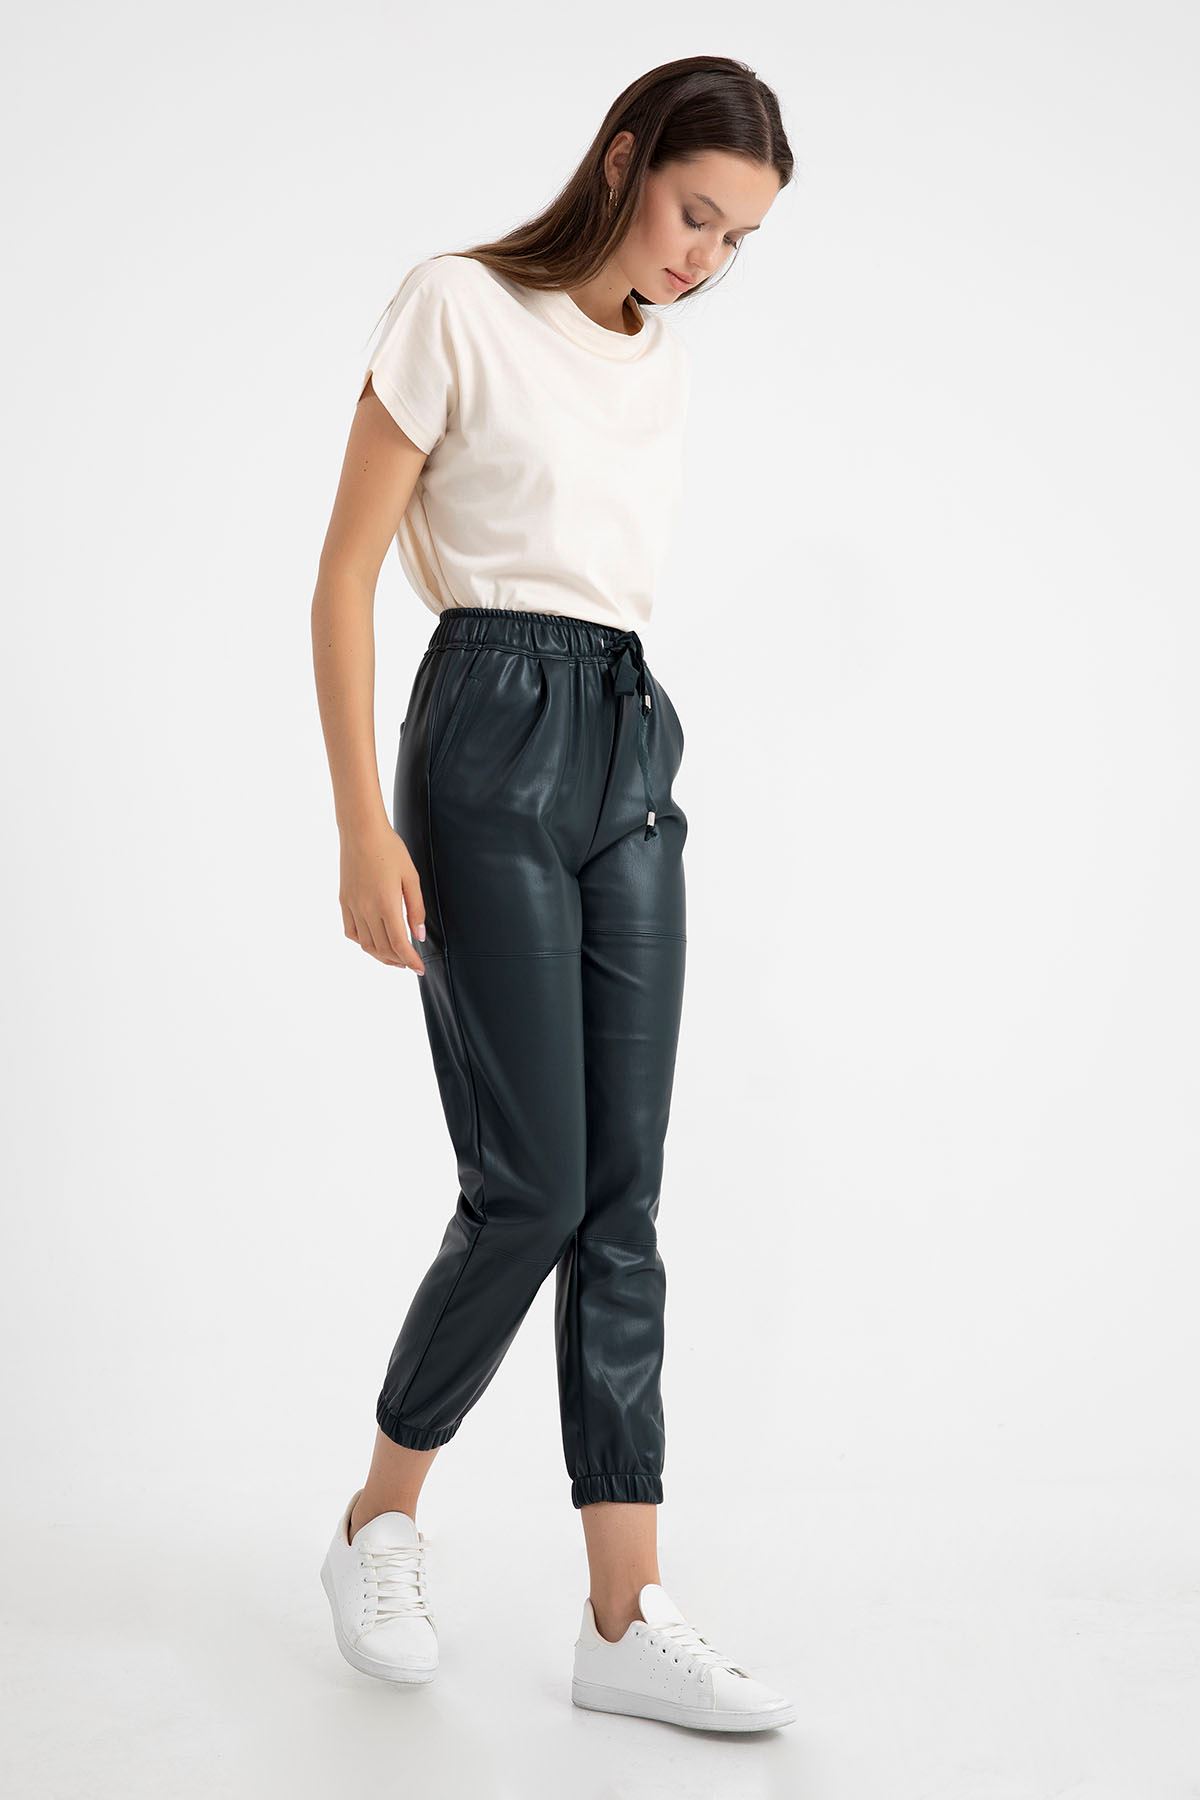 Faux Leather Comfy Fit Women'S Trouser With Elastic Hems - Emerald Green